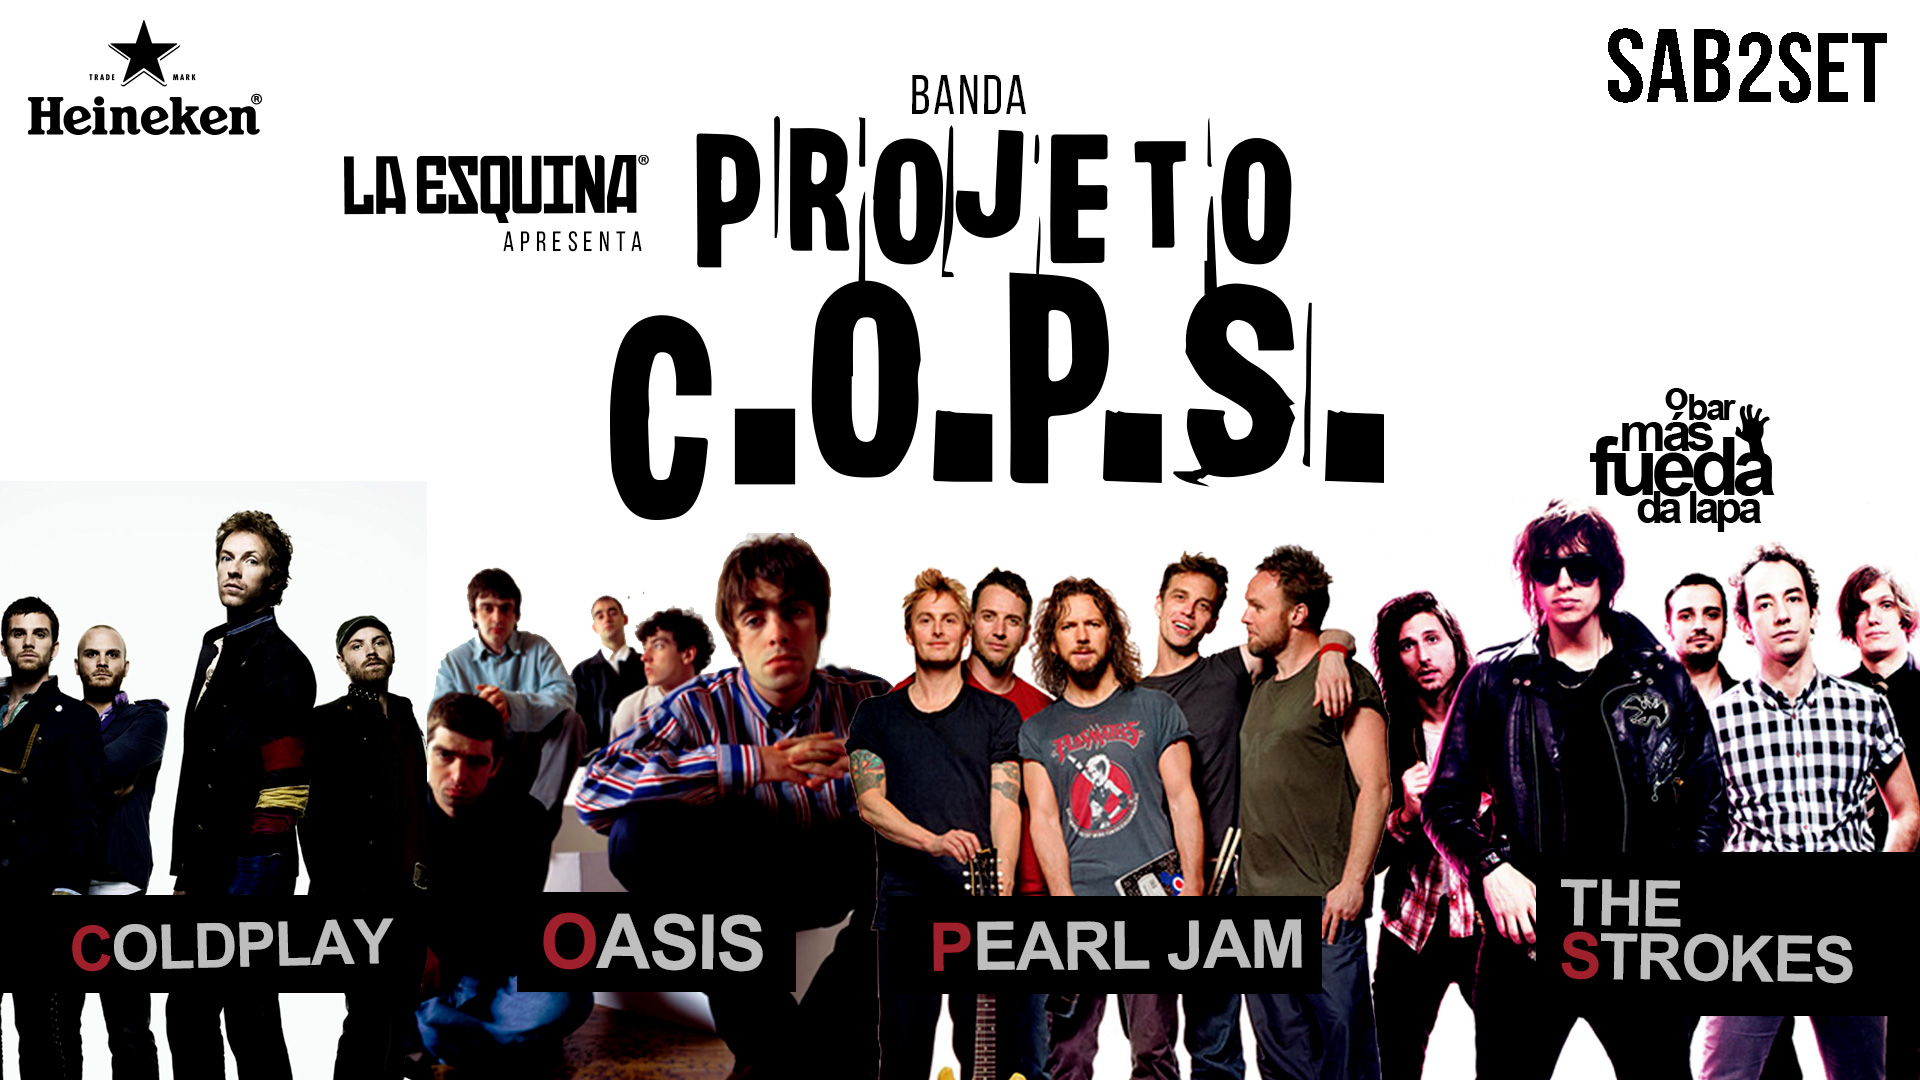 Sunday - Projeto C.O.P.S. Coldplay Oasis Pearl Jam & The Strokes